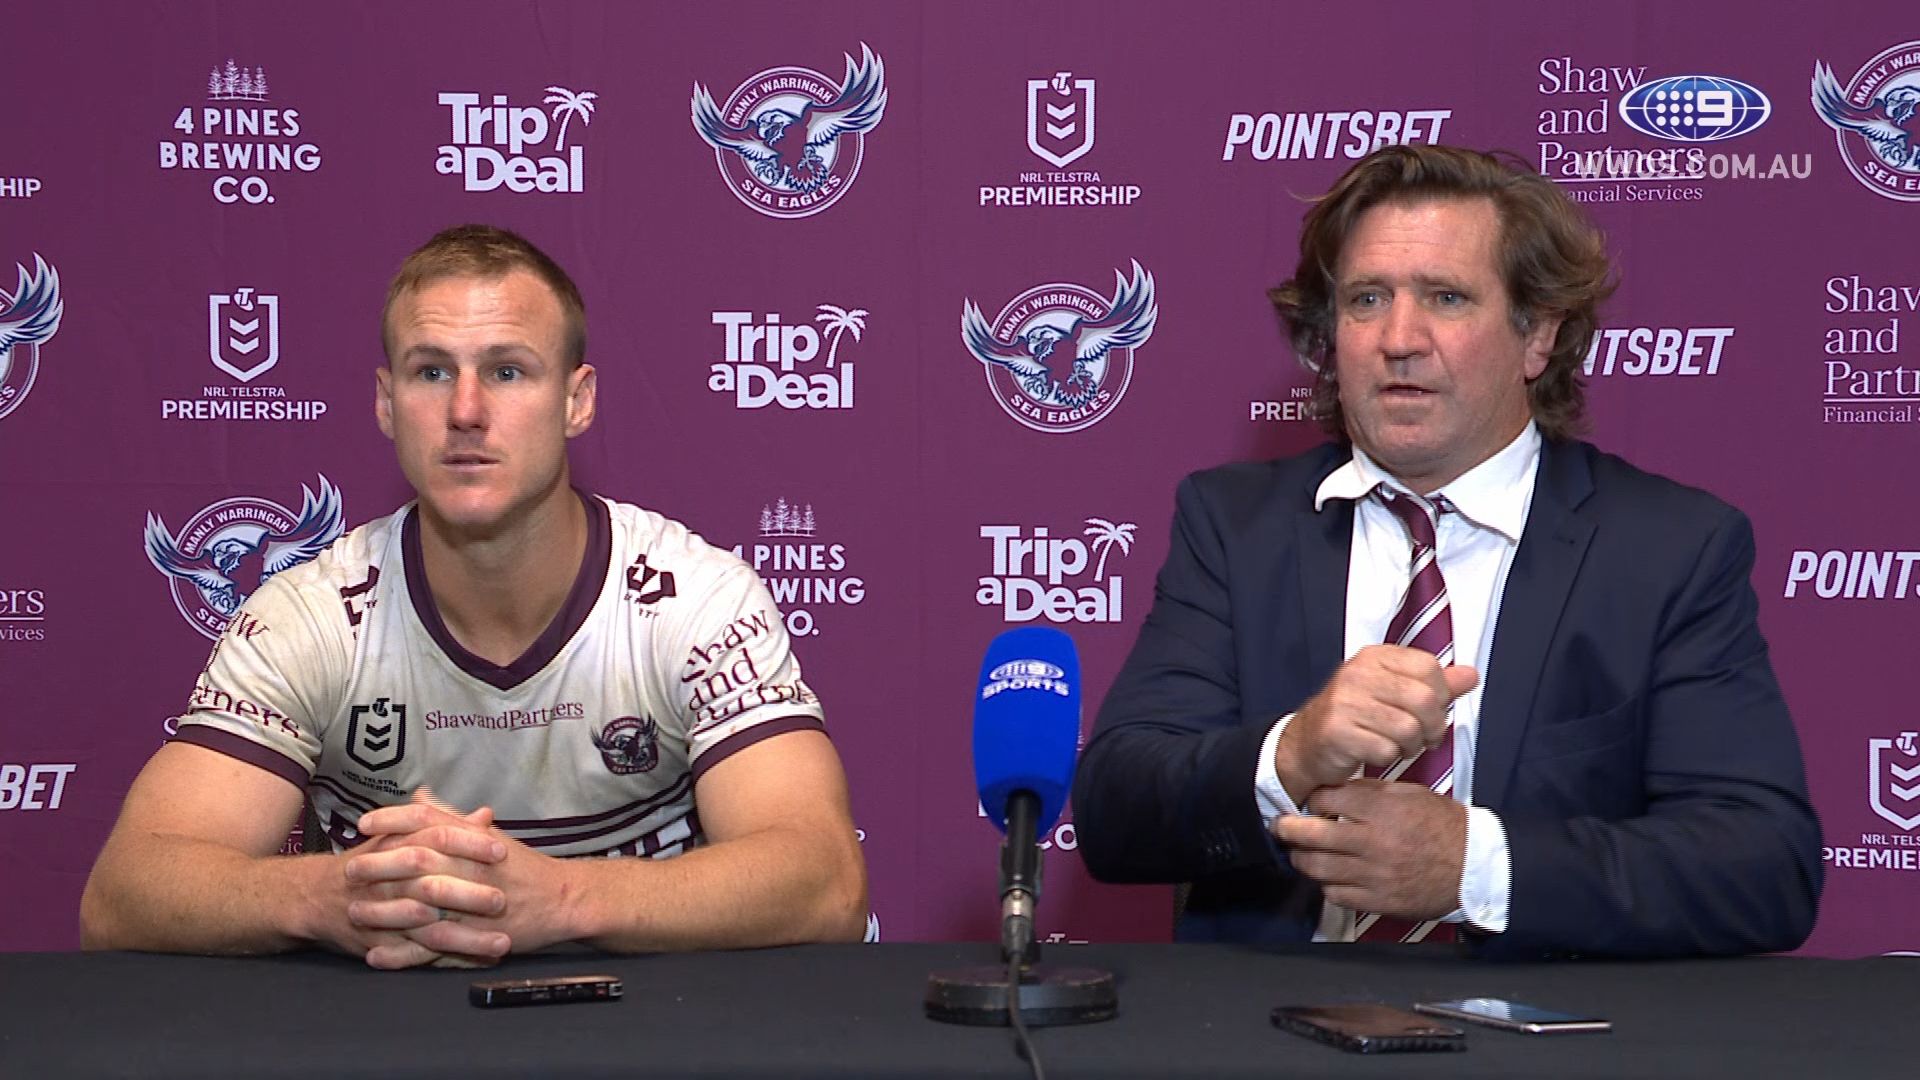 'Adds to the disappointment': Manly coach Des Hasler rips 'dubious' refereeing after dropping thriller